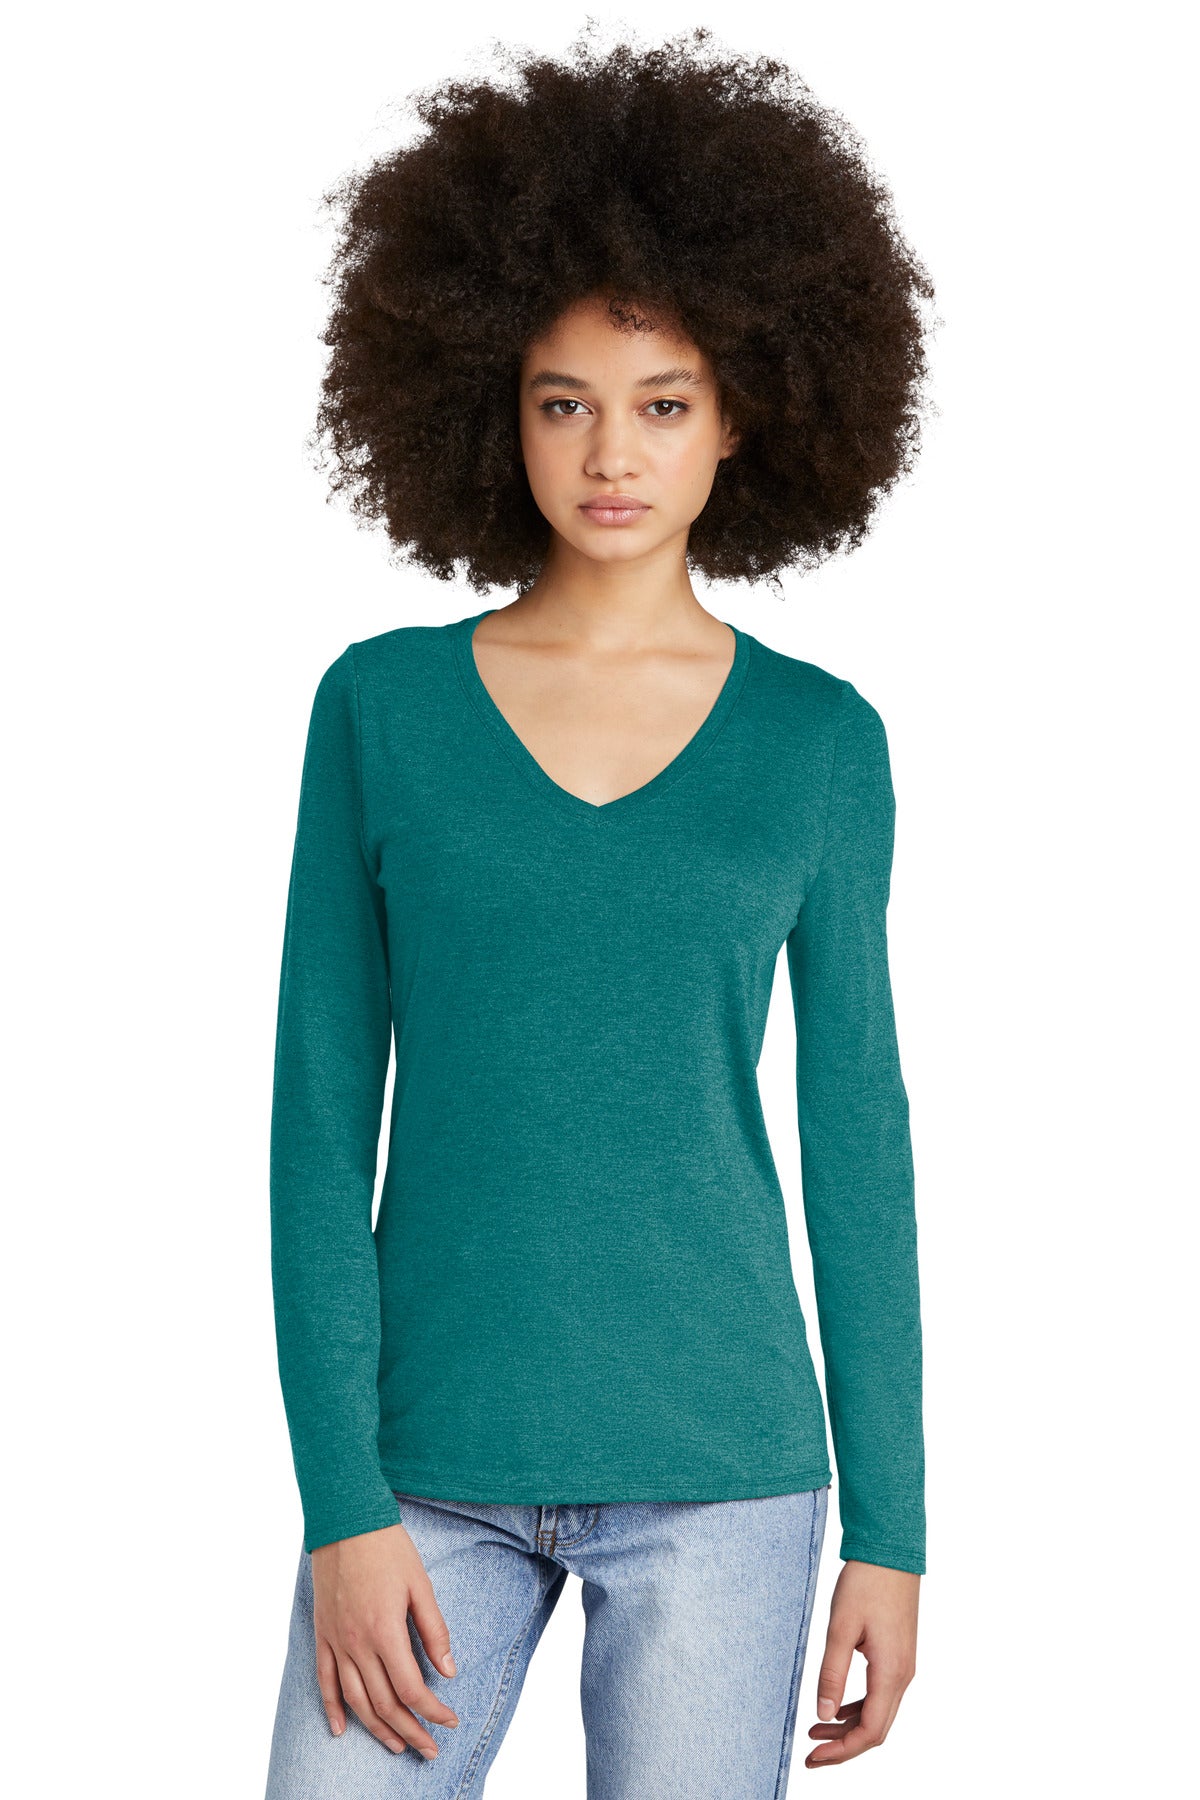 District Women's Perfect Tri Long Sleeve V-Neck Tee DT135